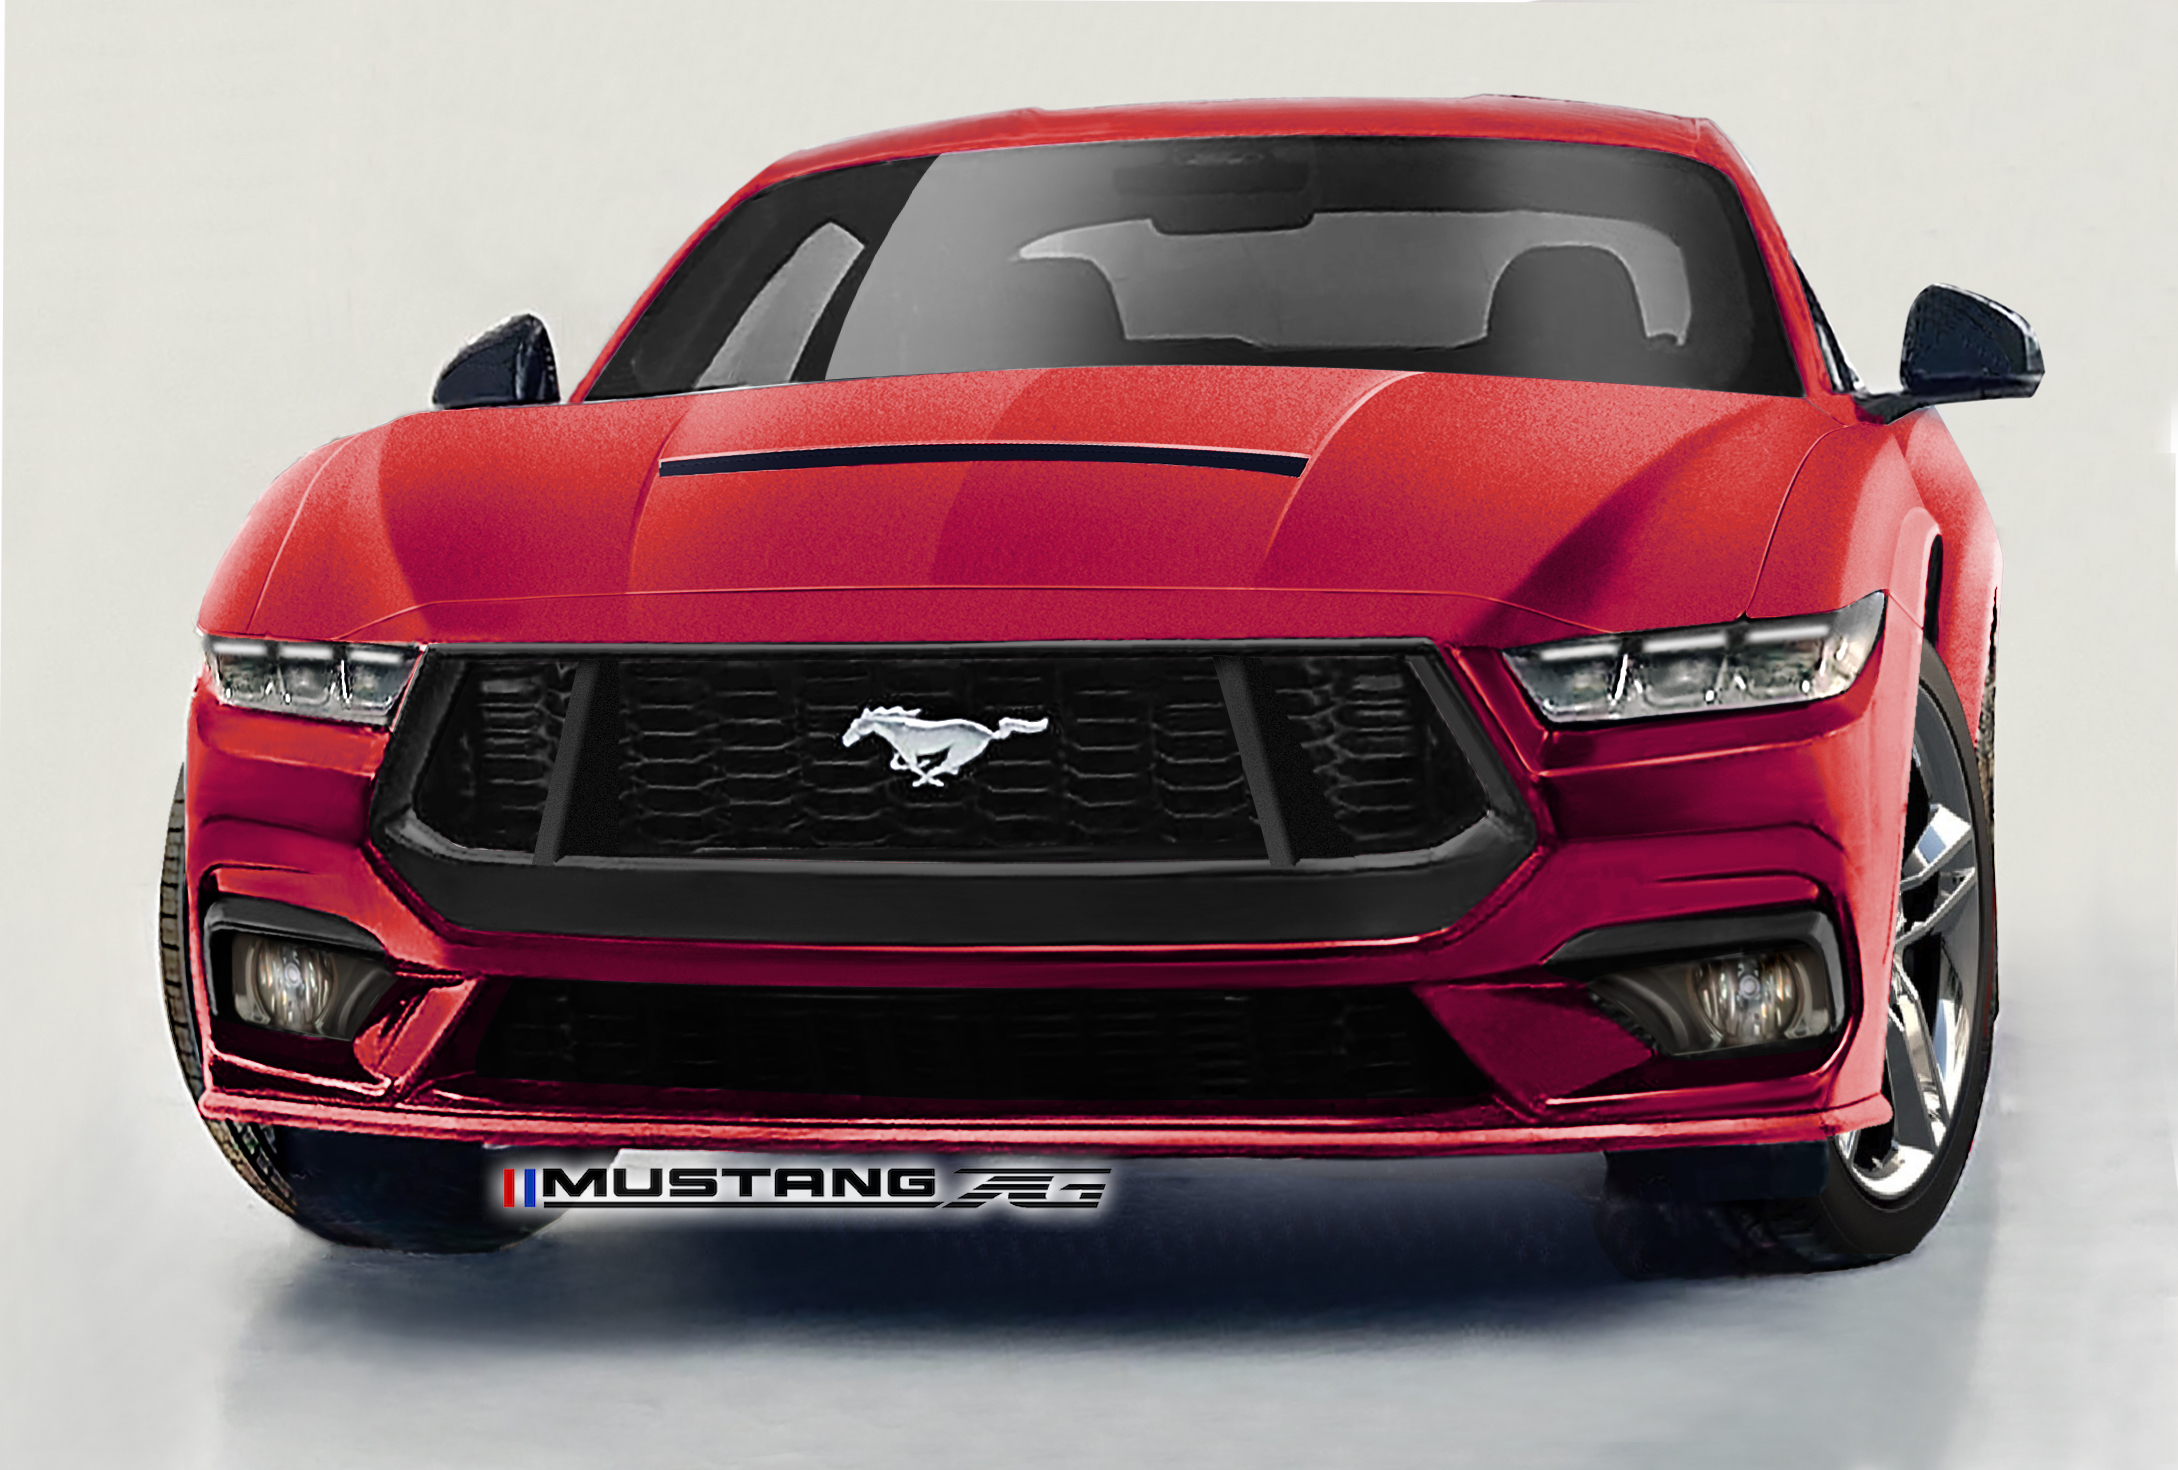 S650 Mustang chazcron weighs in... 7th gen 2023 Mustang S650 3D model & renderings in several colors! Red-GT-S650-Mustang-M7G